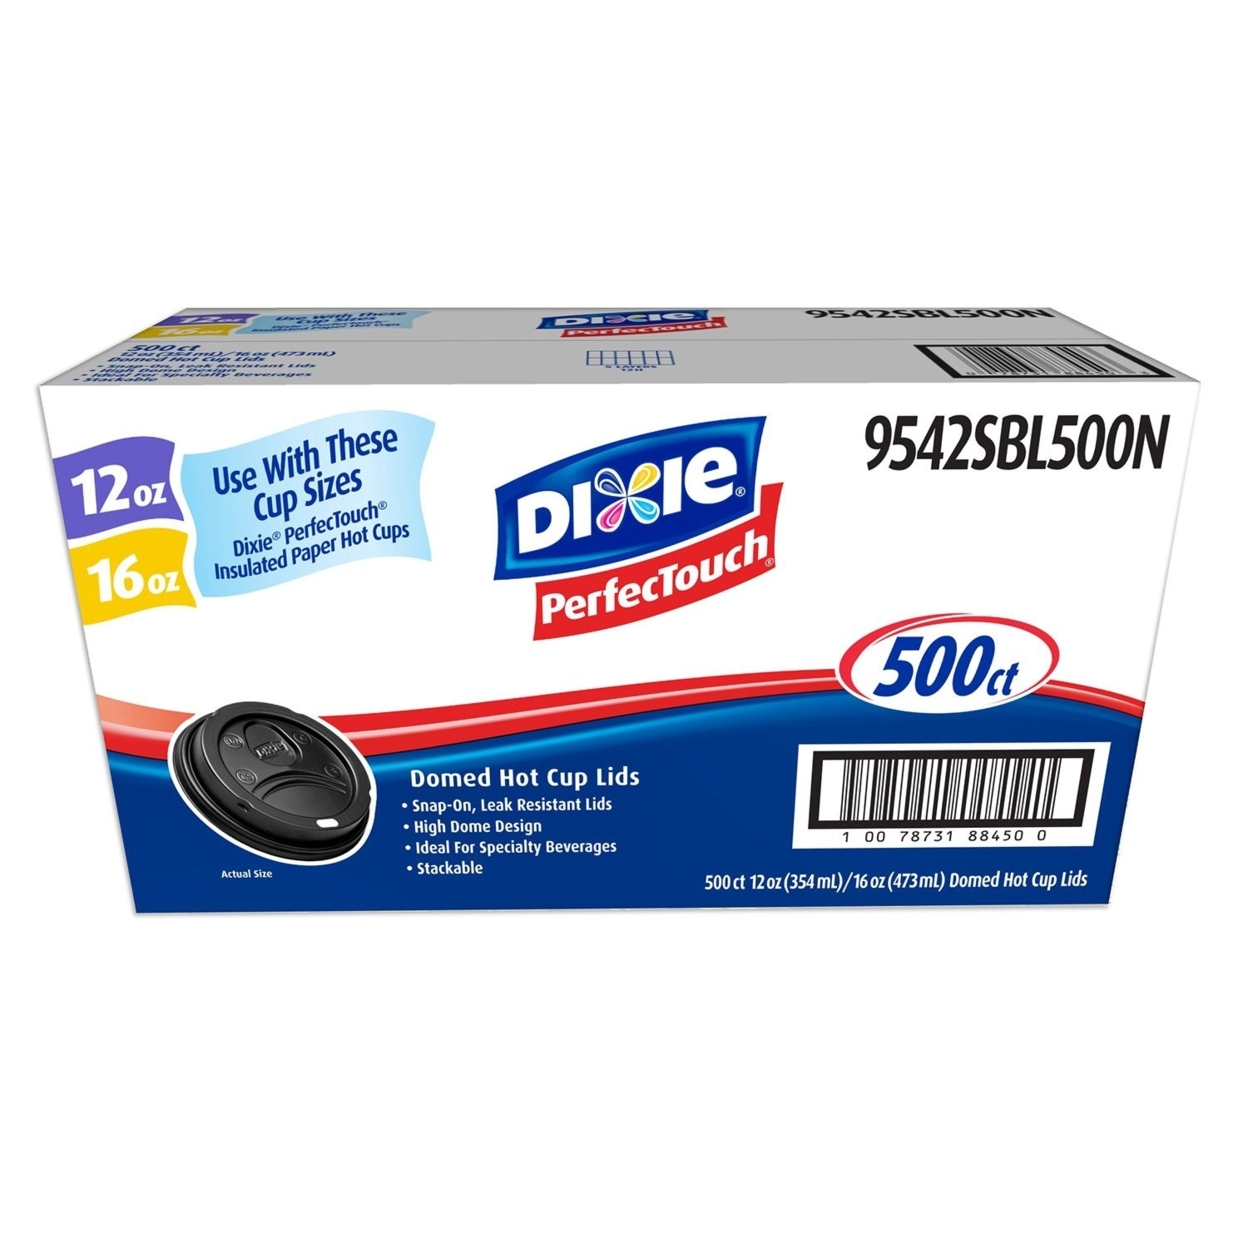 Dixie PerfecTouch Black Domed Hot Cup Lids 12/16oz - 500 Count